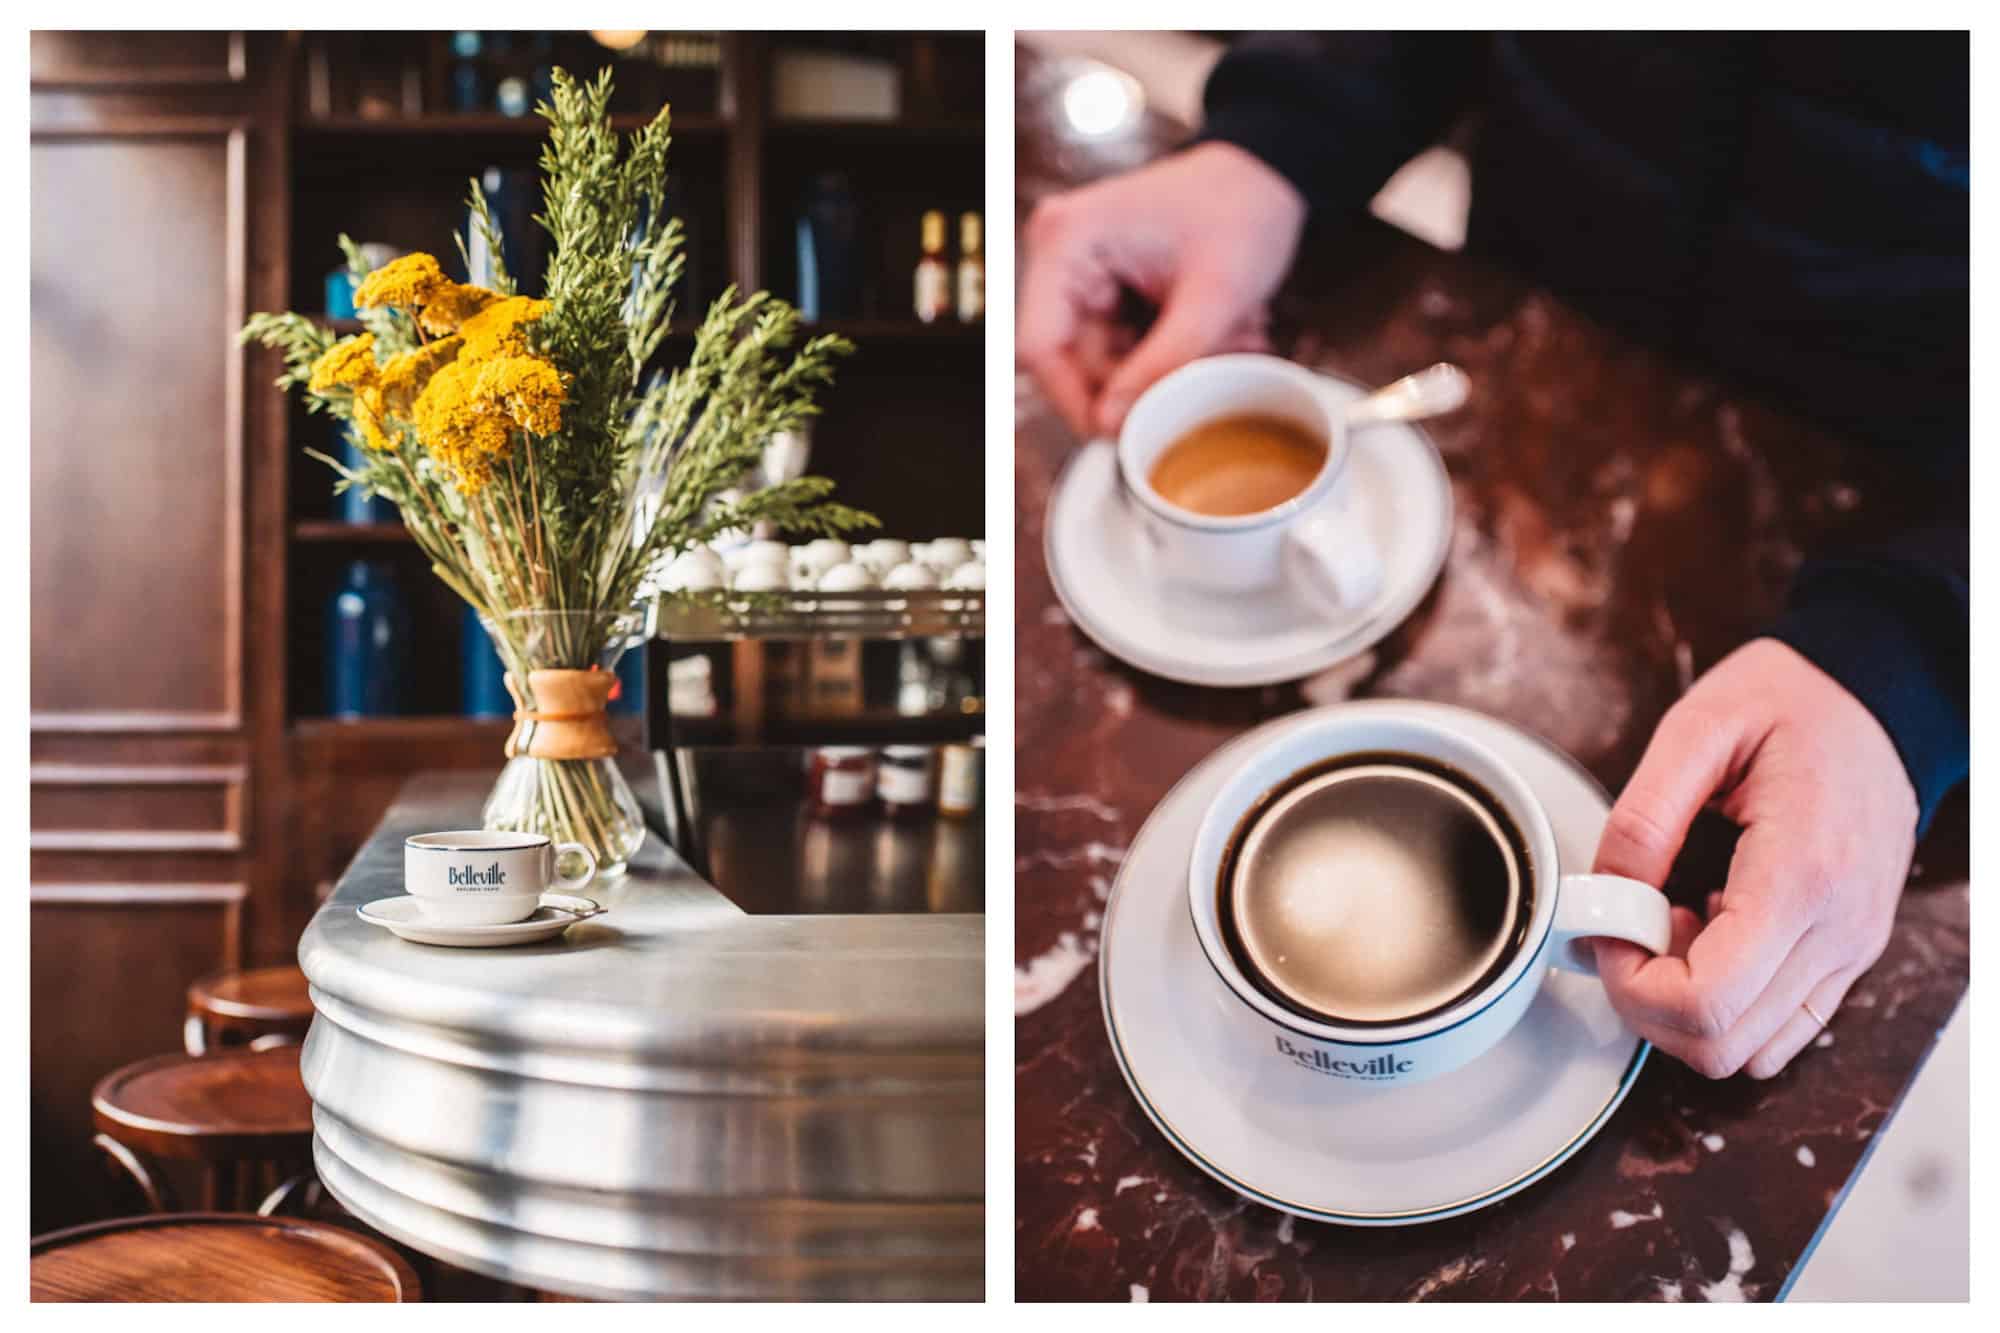 A cup of coffee on the counter of the Belleville Brûlerie coffee roasters in Paris set by a bunch of yellow dried mimosa in a vase (left). Two cups of coffee at the Belleville Brûlerie gluten-free coffee shop in Paris, set on a brown marble counter (right). 